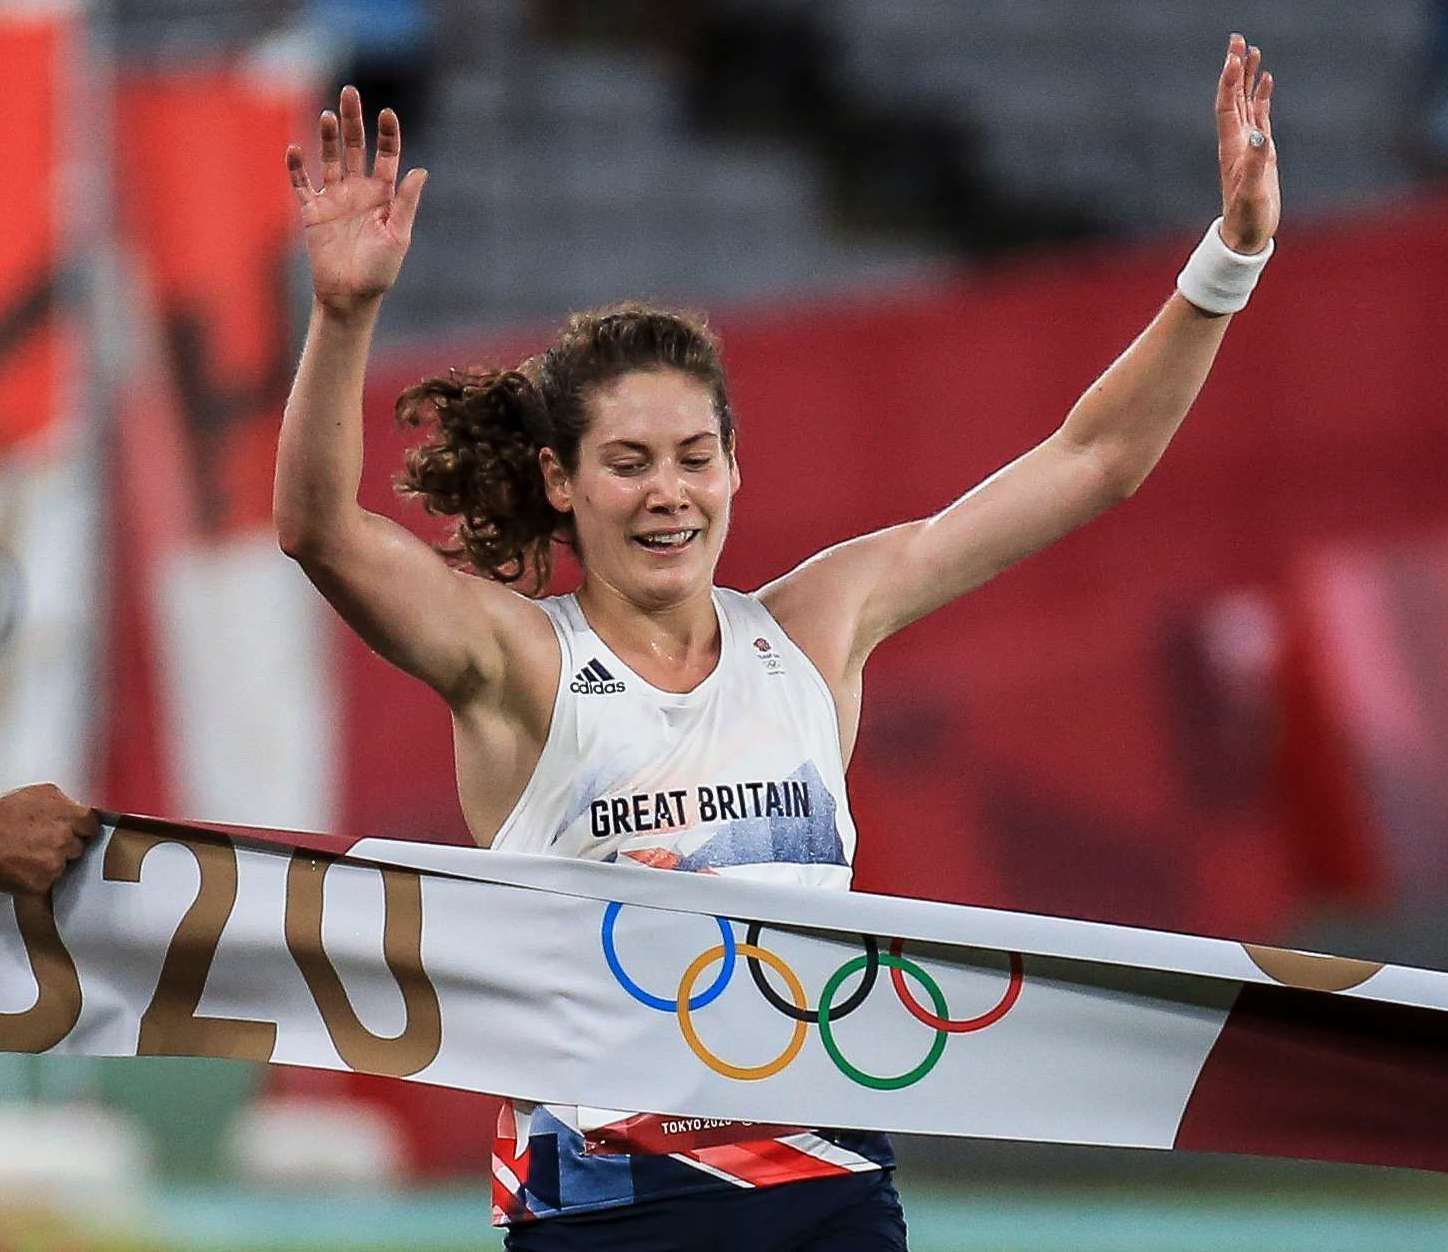 Meopham's Kate French wins modern pentathlon gold for Team GB at the Tokyo Olympics. Picture: UPIM Media